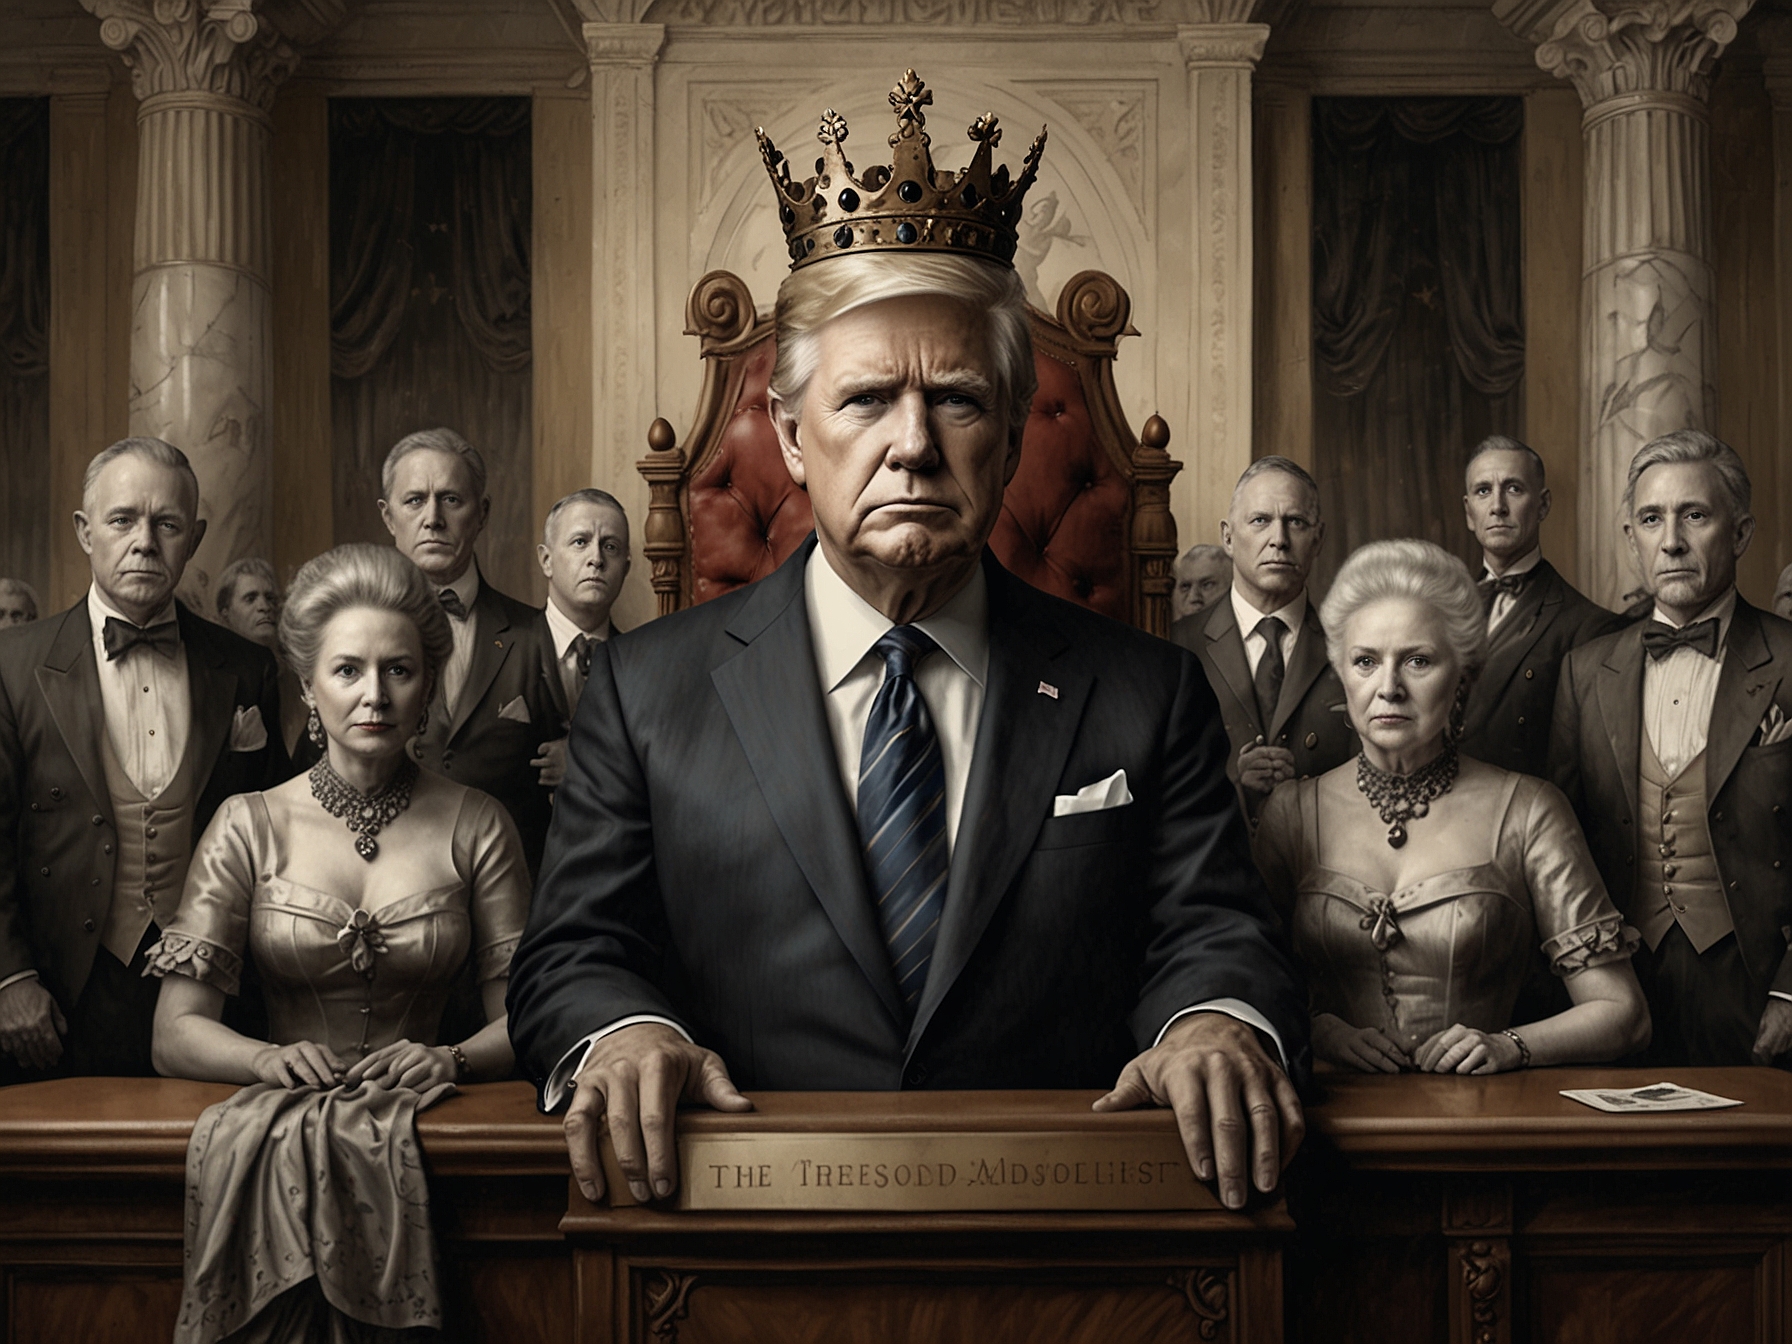 Illustration shows the President portrayed as a monarch, surrounded by court jesters and advisors, highlighting concerns about the erosion of democratic checks and balances under the new ruling.